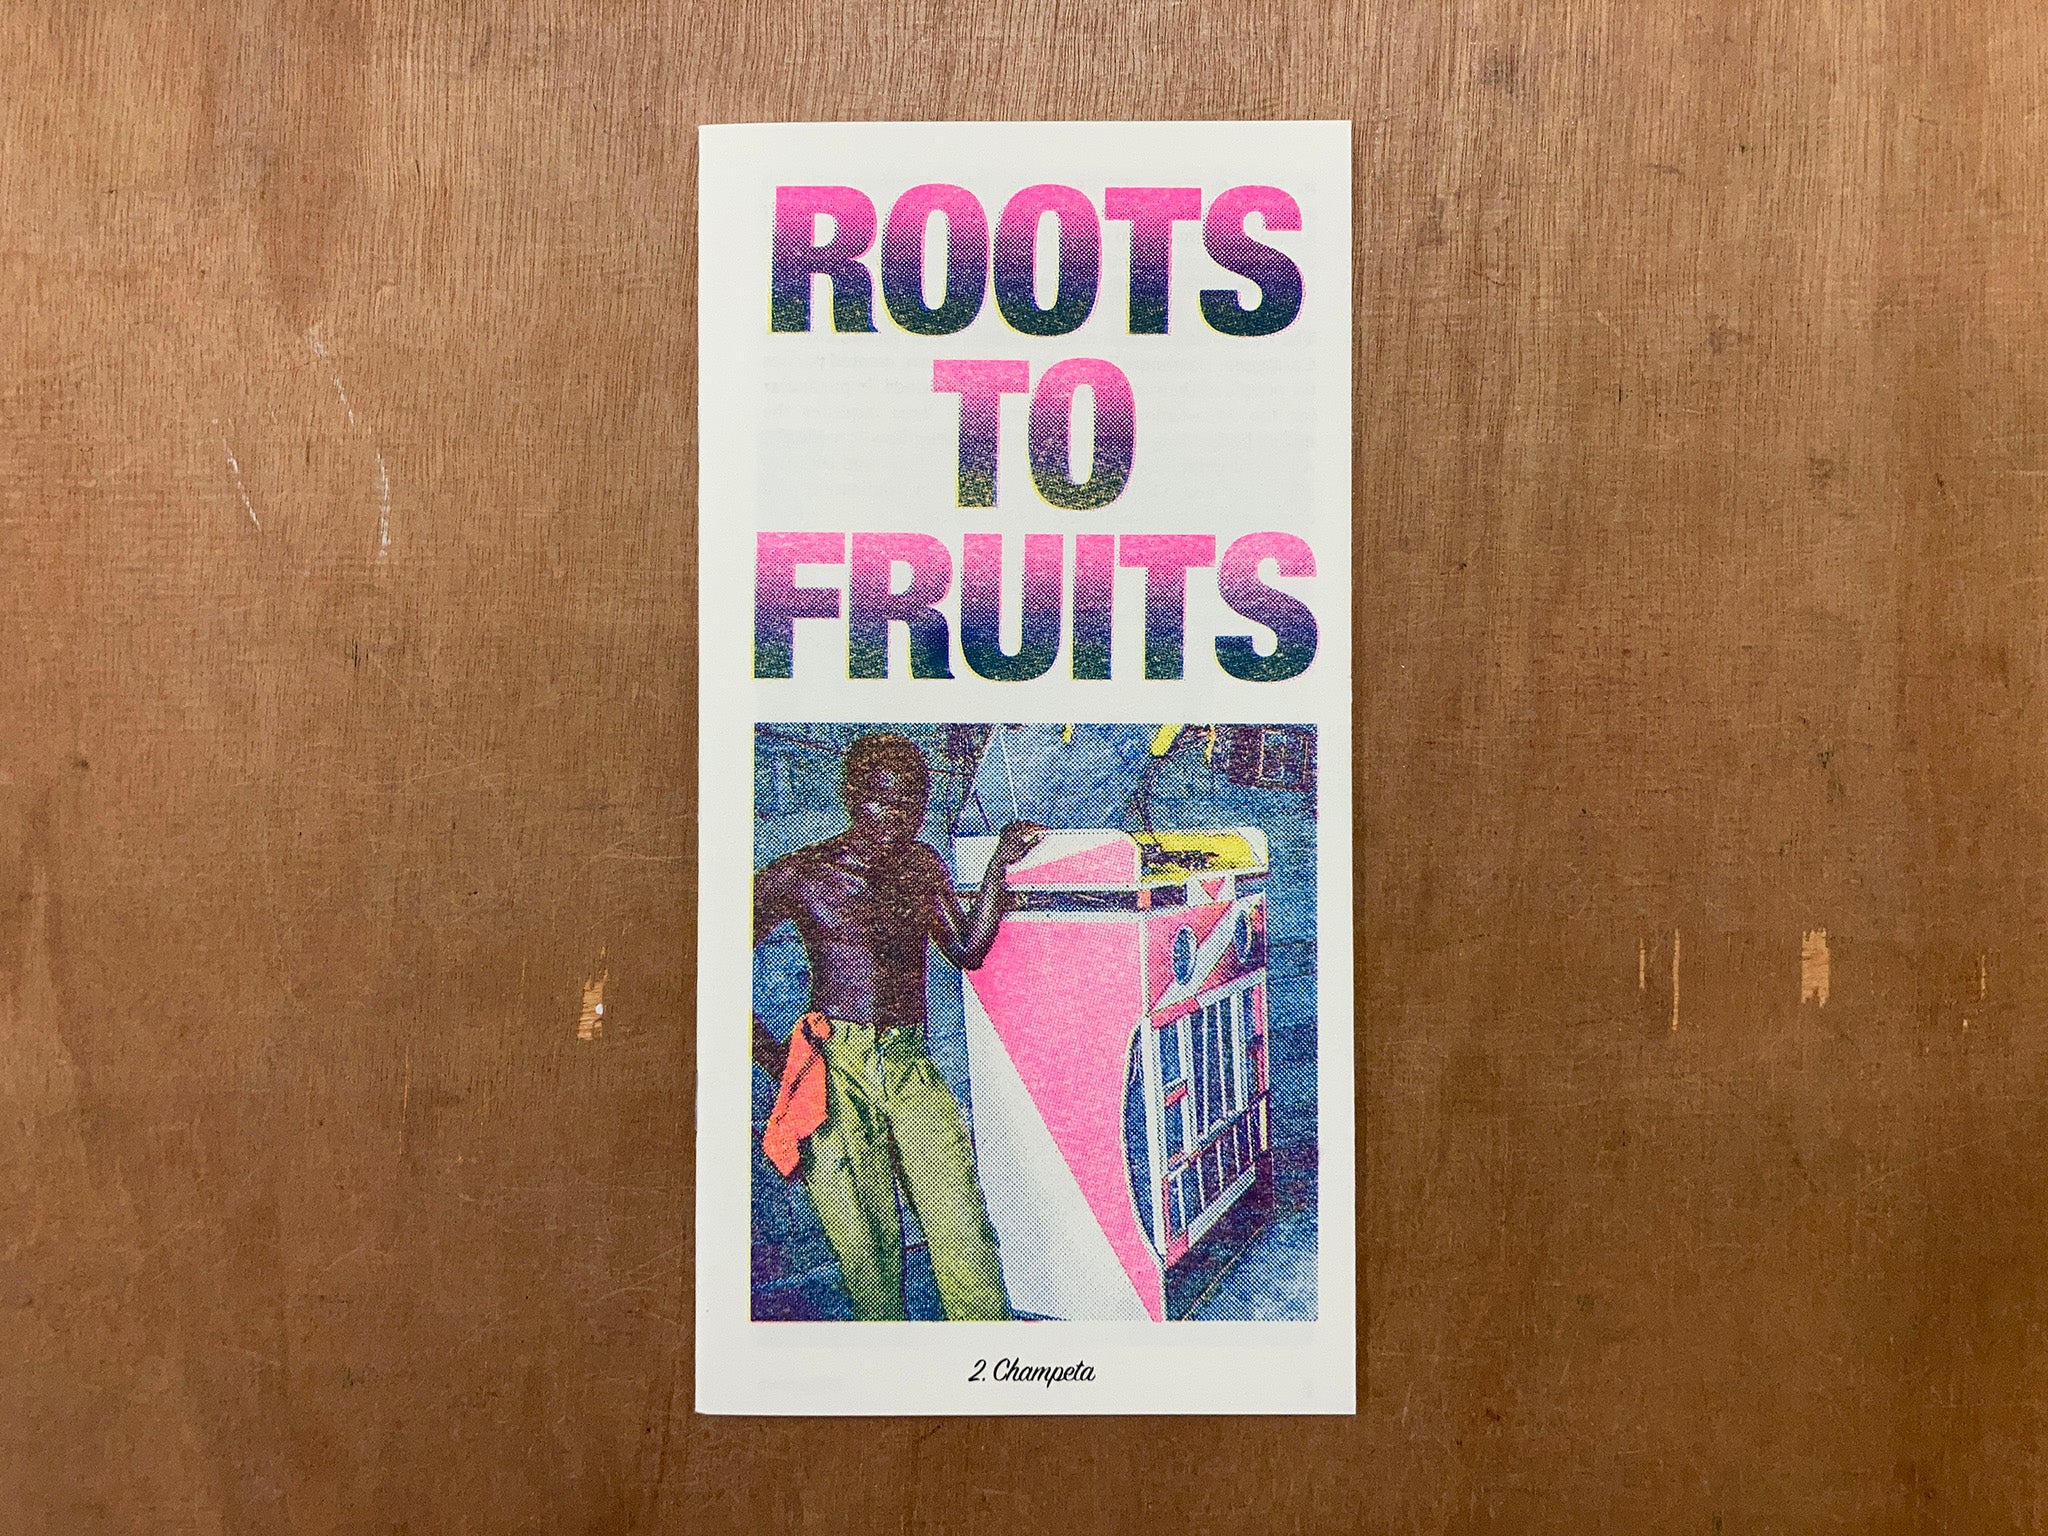 ROOTS TO FRUITS Nº2 CHAMPETA: A COLOMBIAN CARIBBEAN CULTURAL RESISTANCE